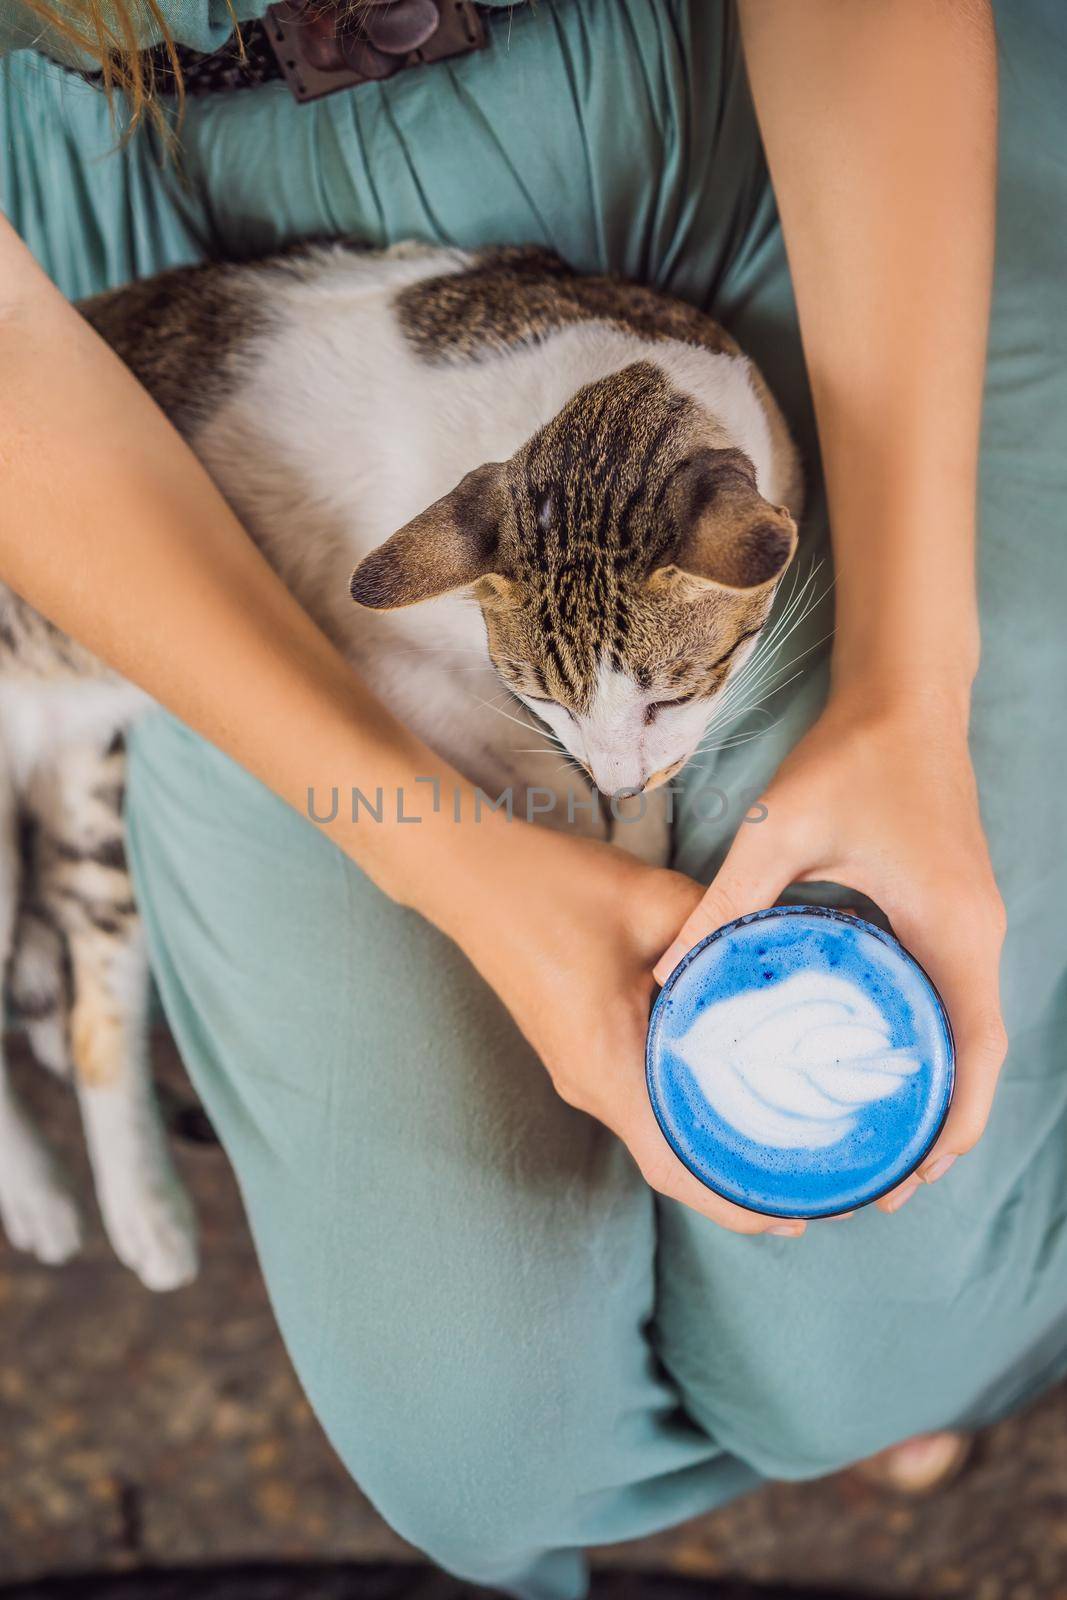 Young woman having a mediterranean breakfast seated at sofa and with her cat and drinks Trendy drink: Blue latte. Hot butterfly pea latte or blue spirulina latte by galitskaya